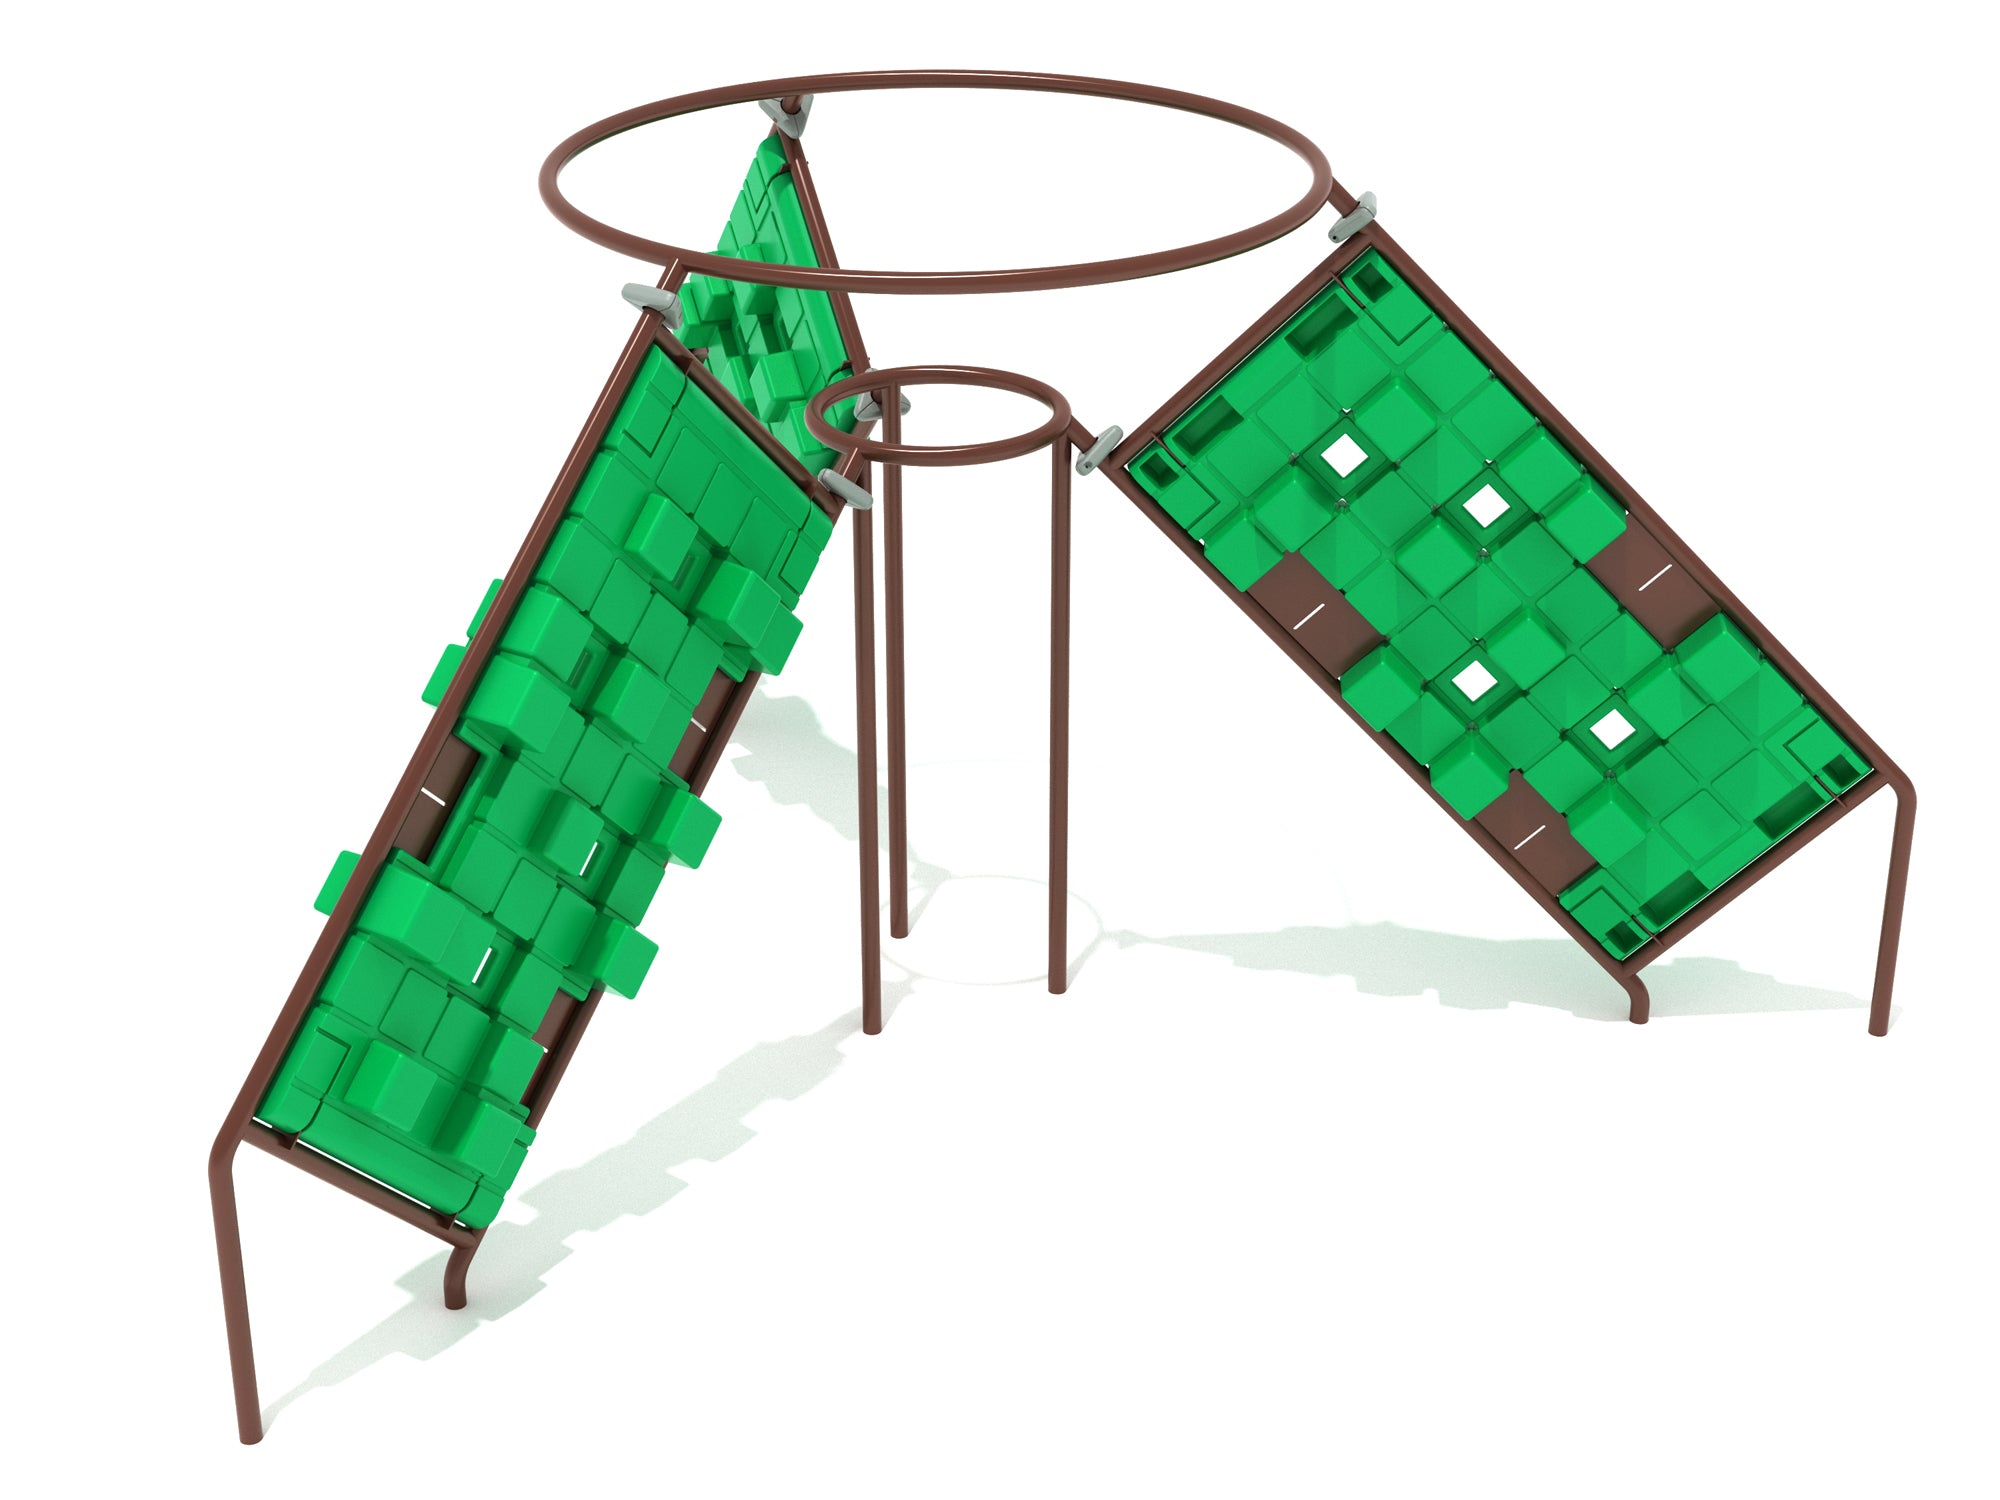 Playground-Equipment-Commercial-Pixel-Funnel-Climber